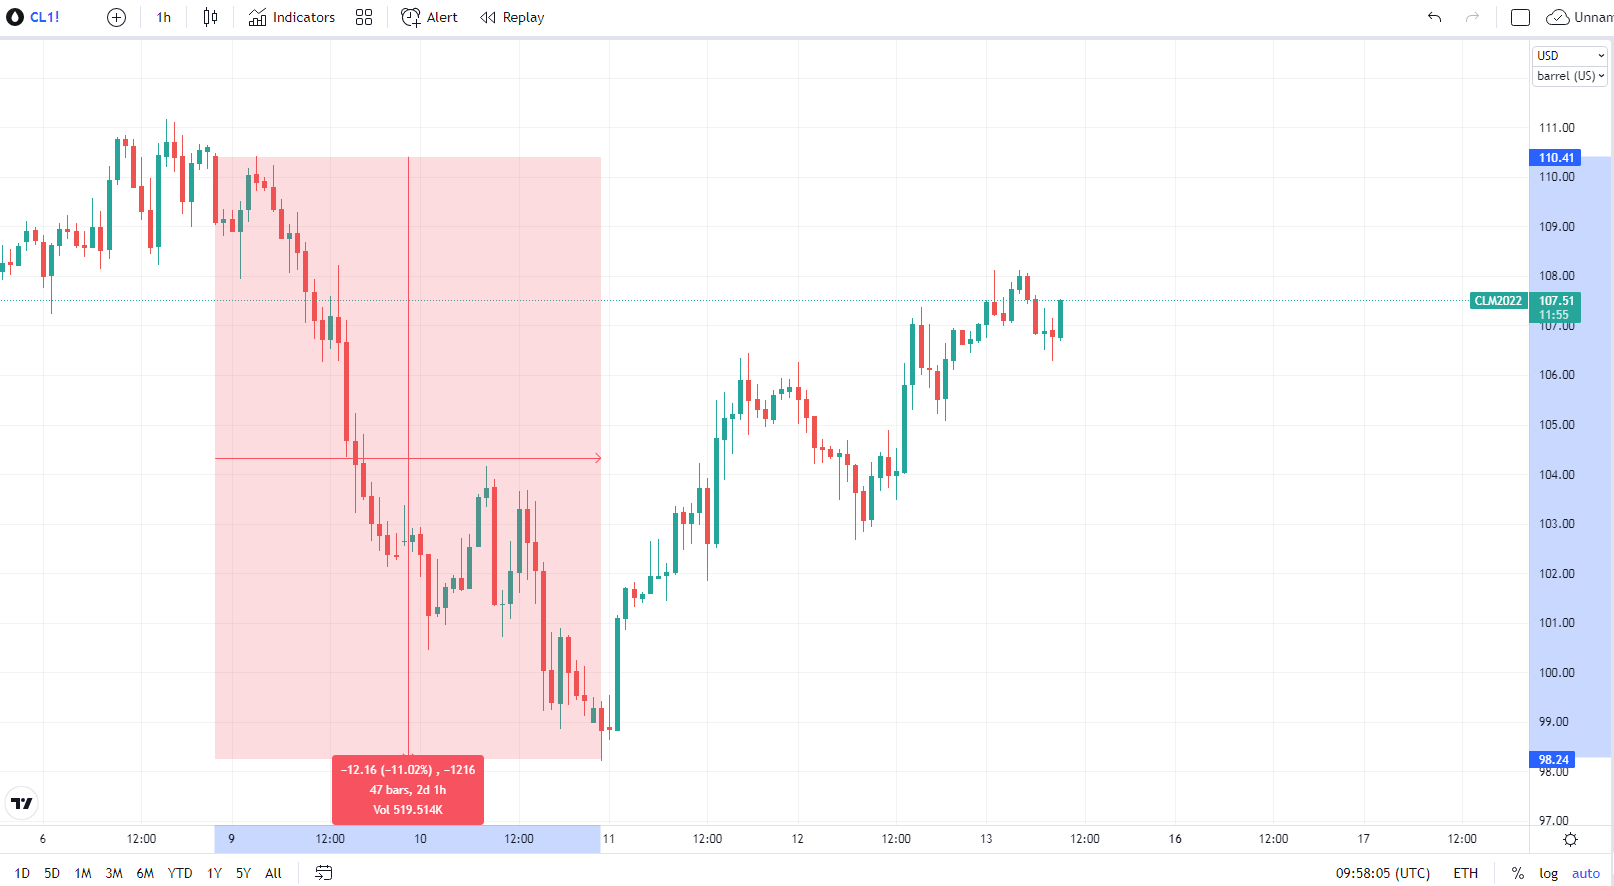 30 minutes chart of CL (Crude oil futures), Weekly volatility. Source: tradingview.com